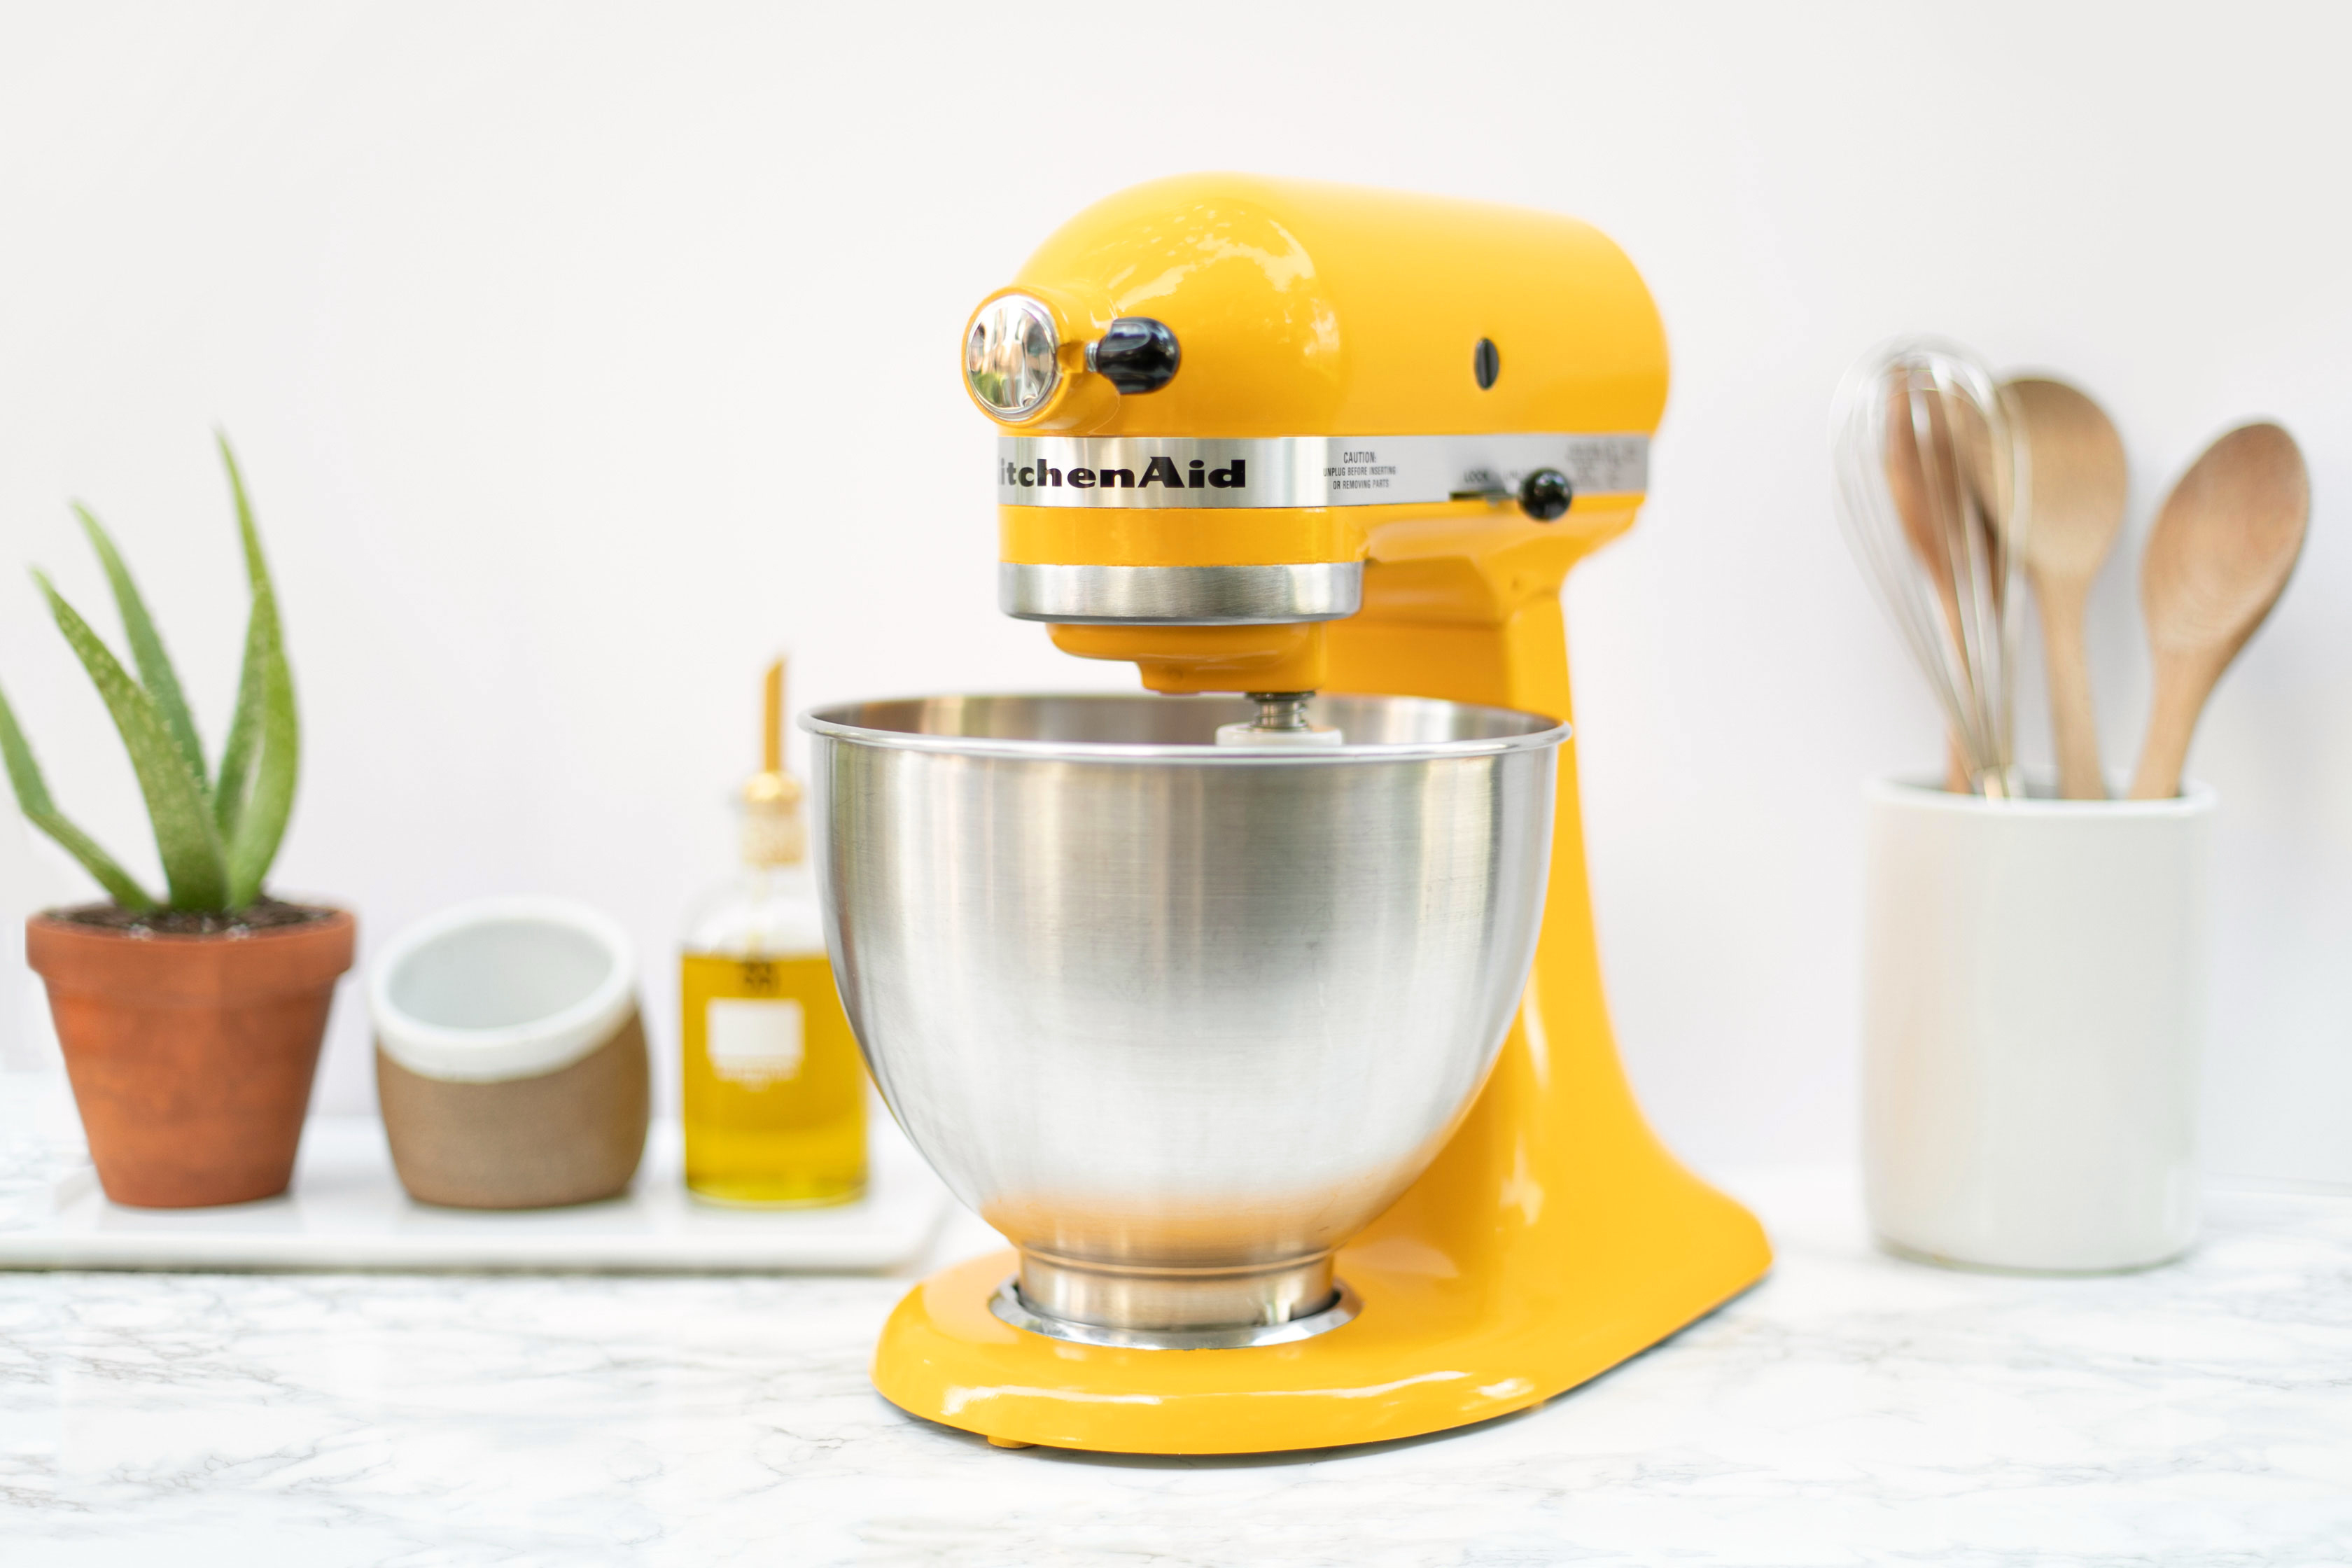 How To Paint a KitchenAid Mixer a New Color